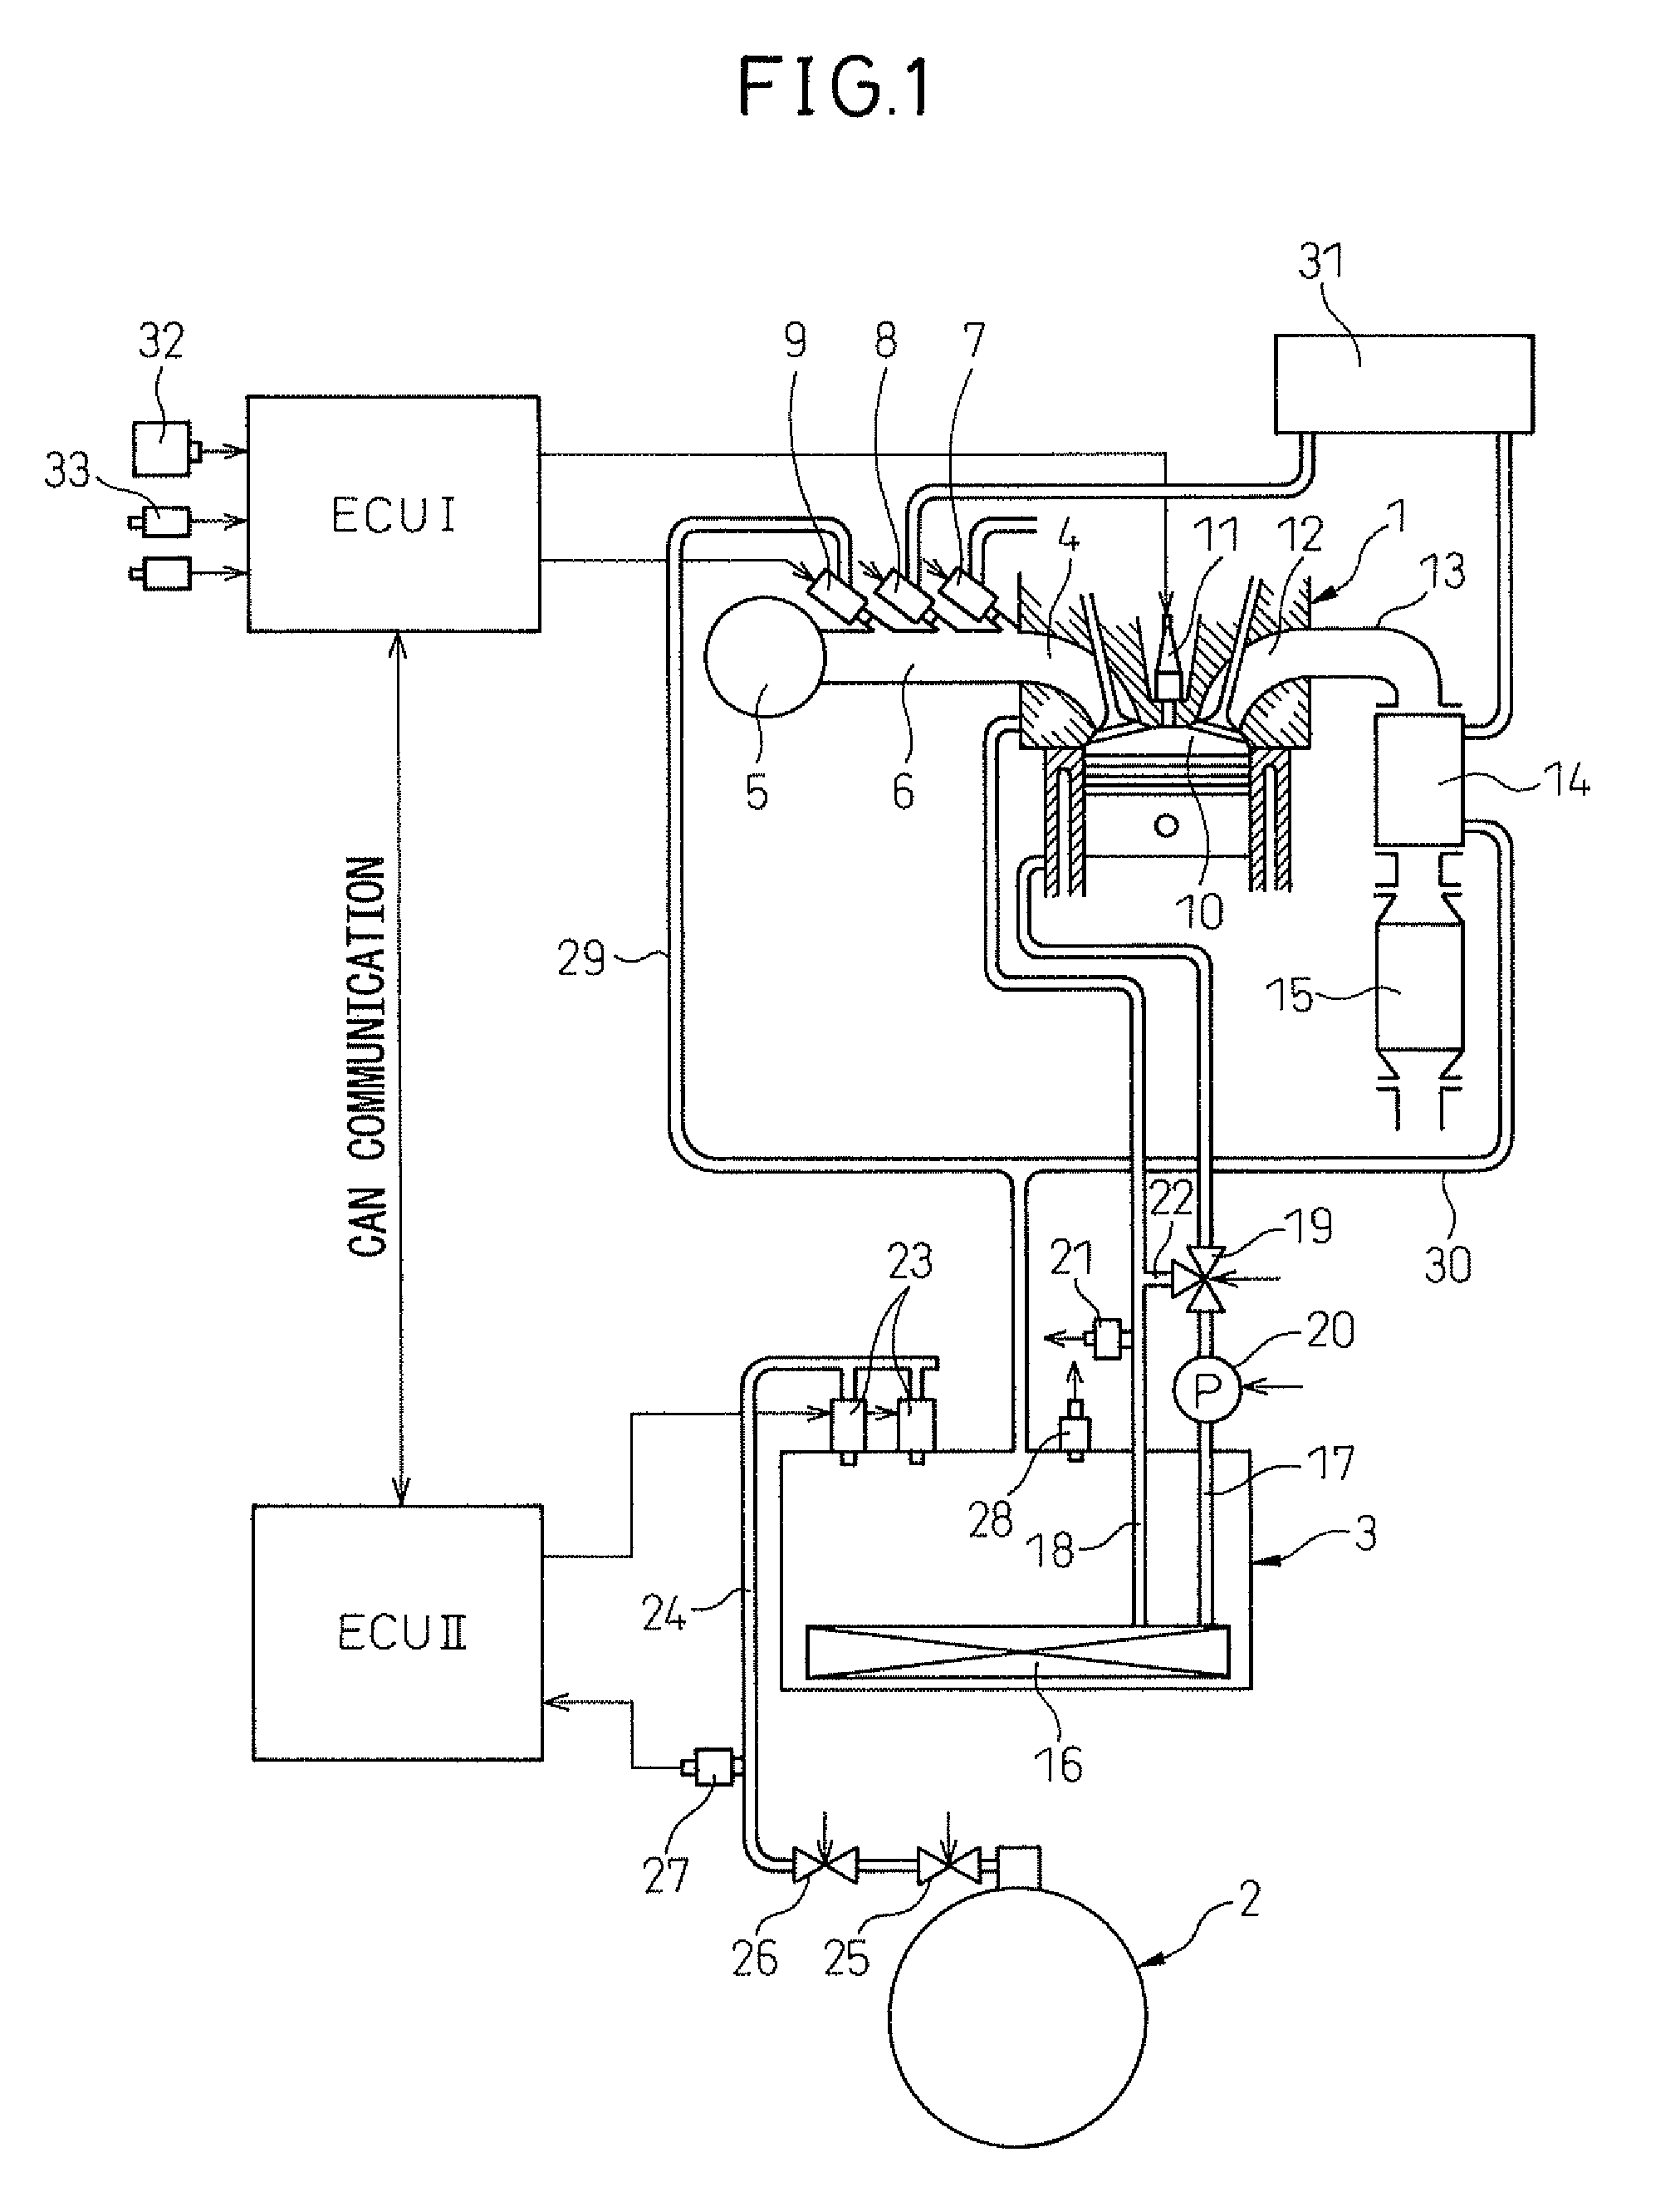 Control device of an internal combustion engine